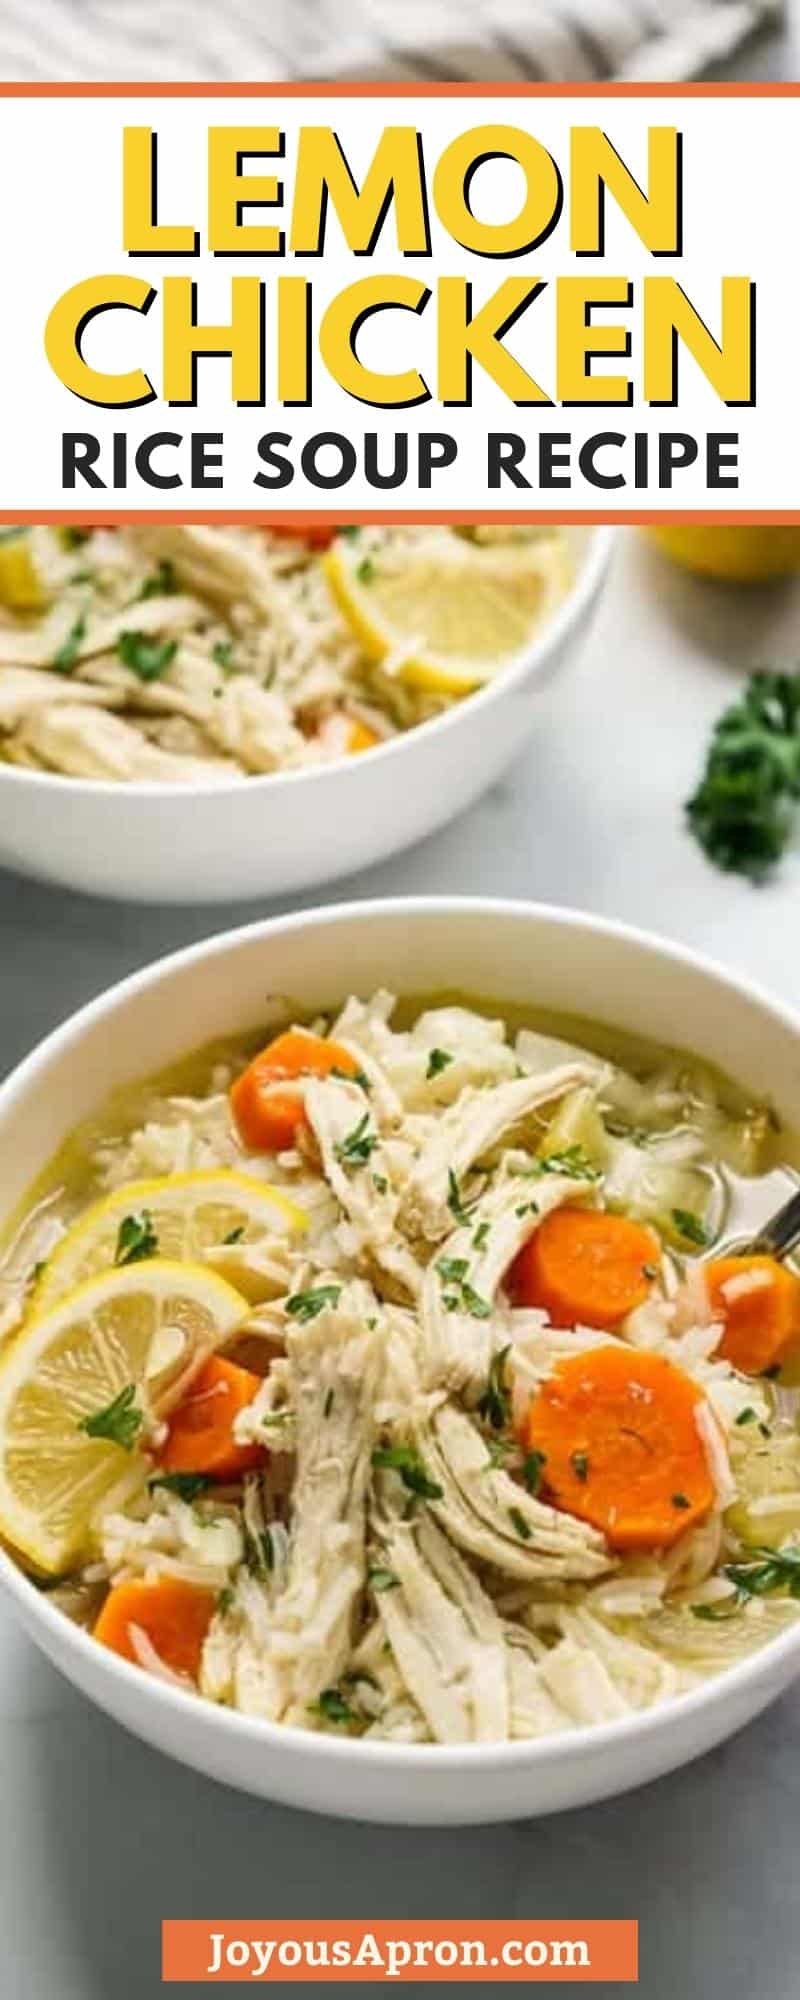 Lemon Chicken and Rice Soup - cozy and easy soup recipe! Chicken bone broth infused with herbs, cooked with chicken, rice, lemon juice and lots of veggies. Comfort food for the soul! via @joyousapron